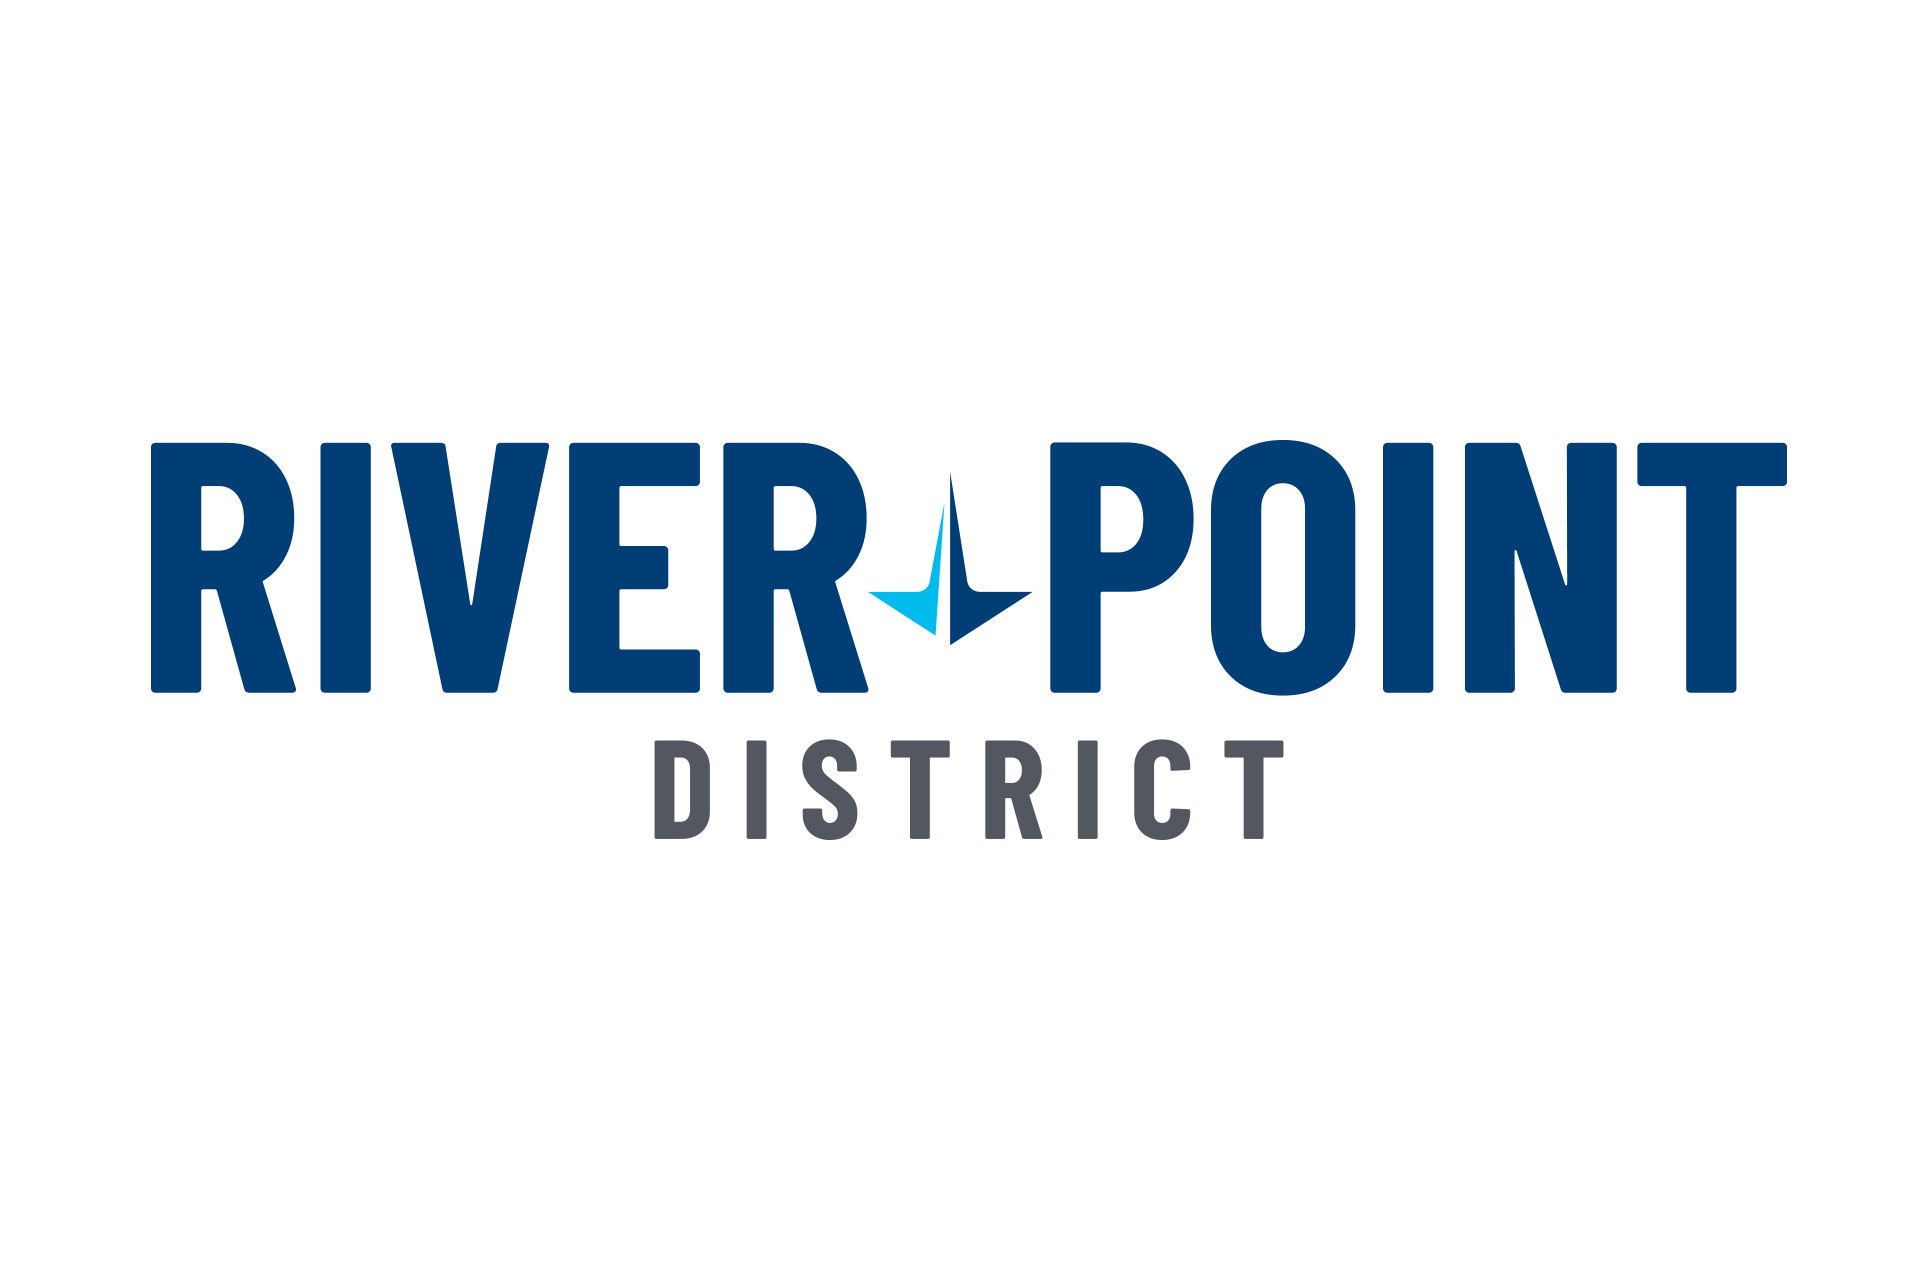 River Point District color logo created by Vendi Advertising 